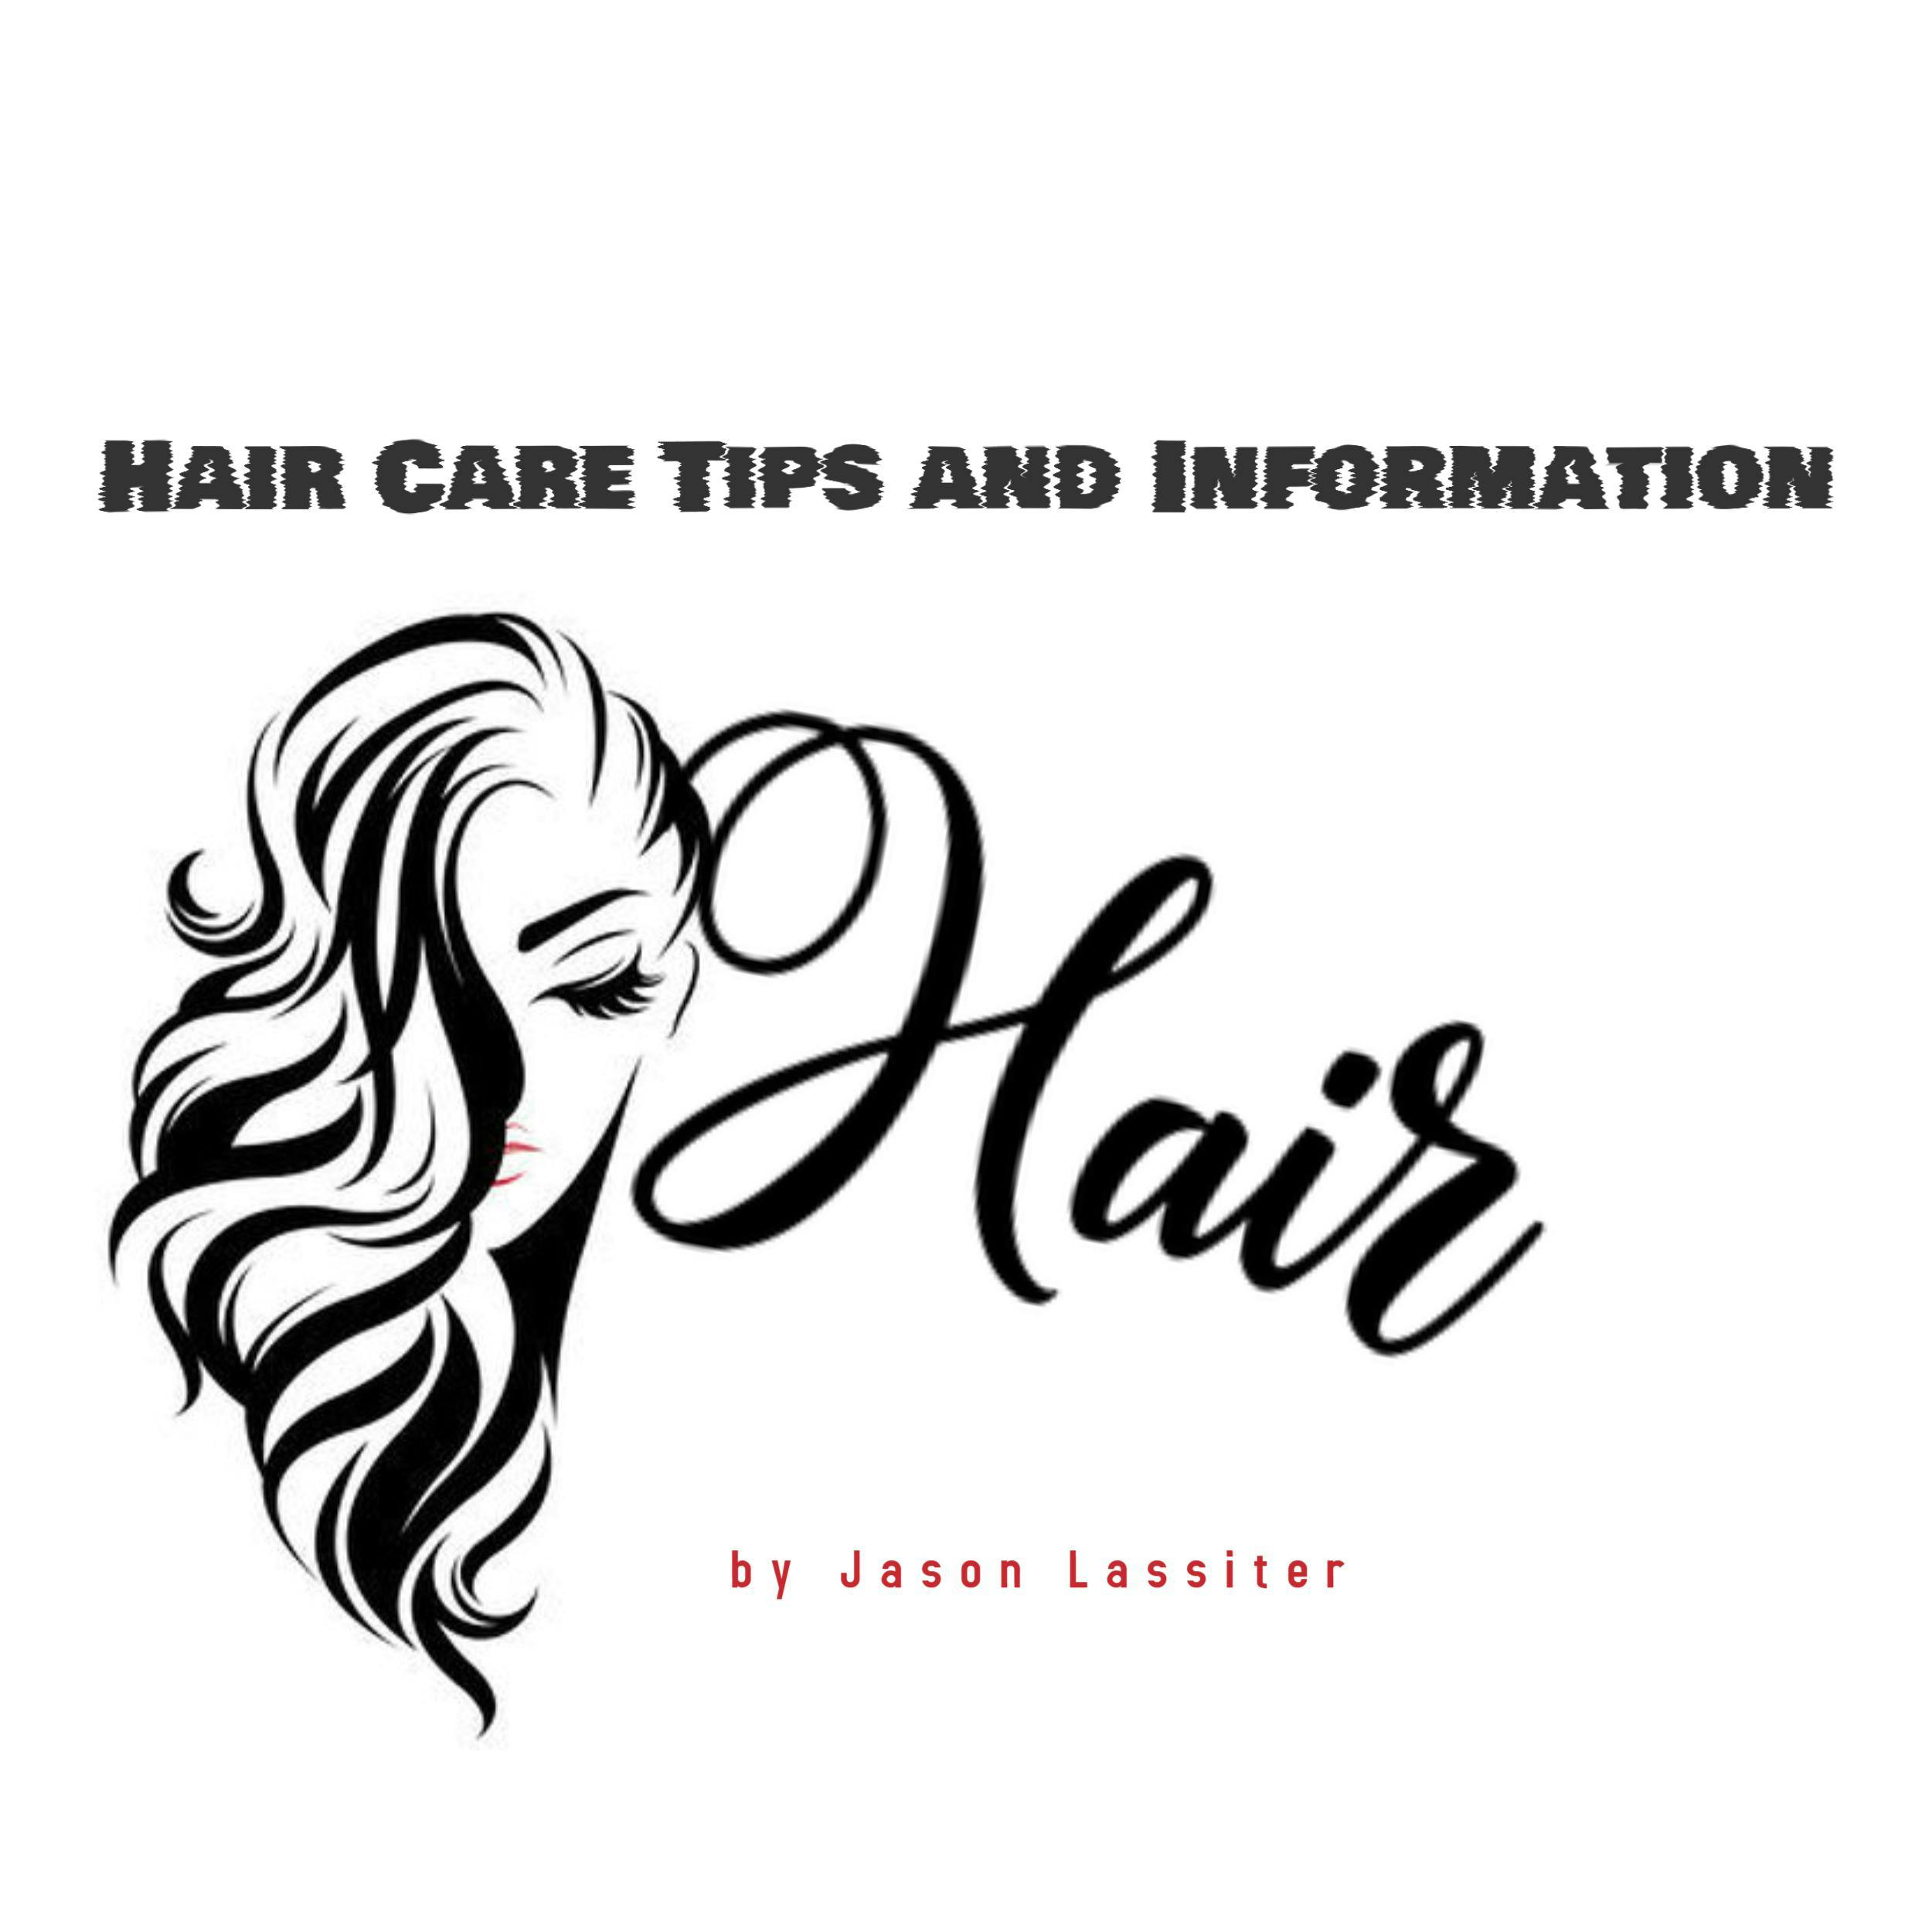 Hair Care Tips and Information - Jason Lassiter